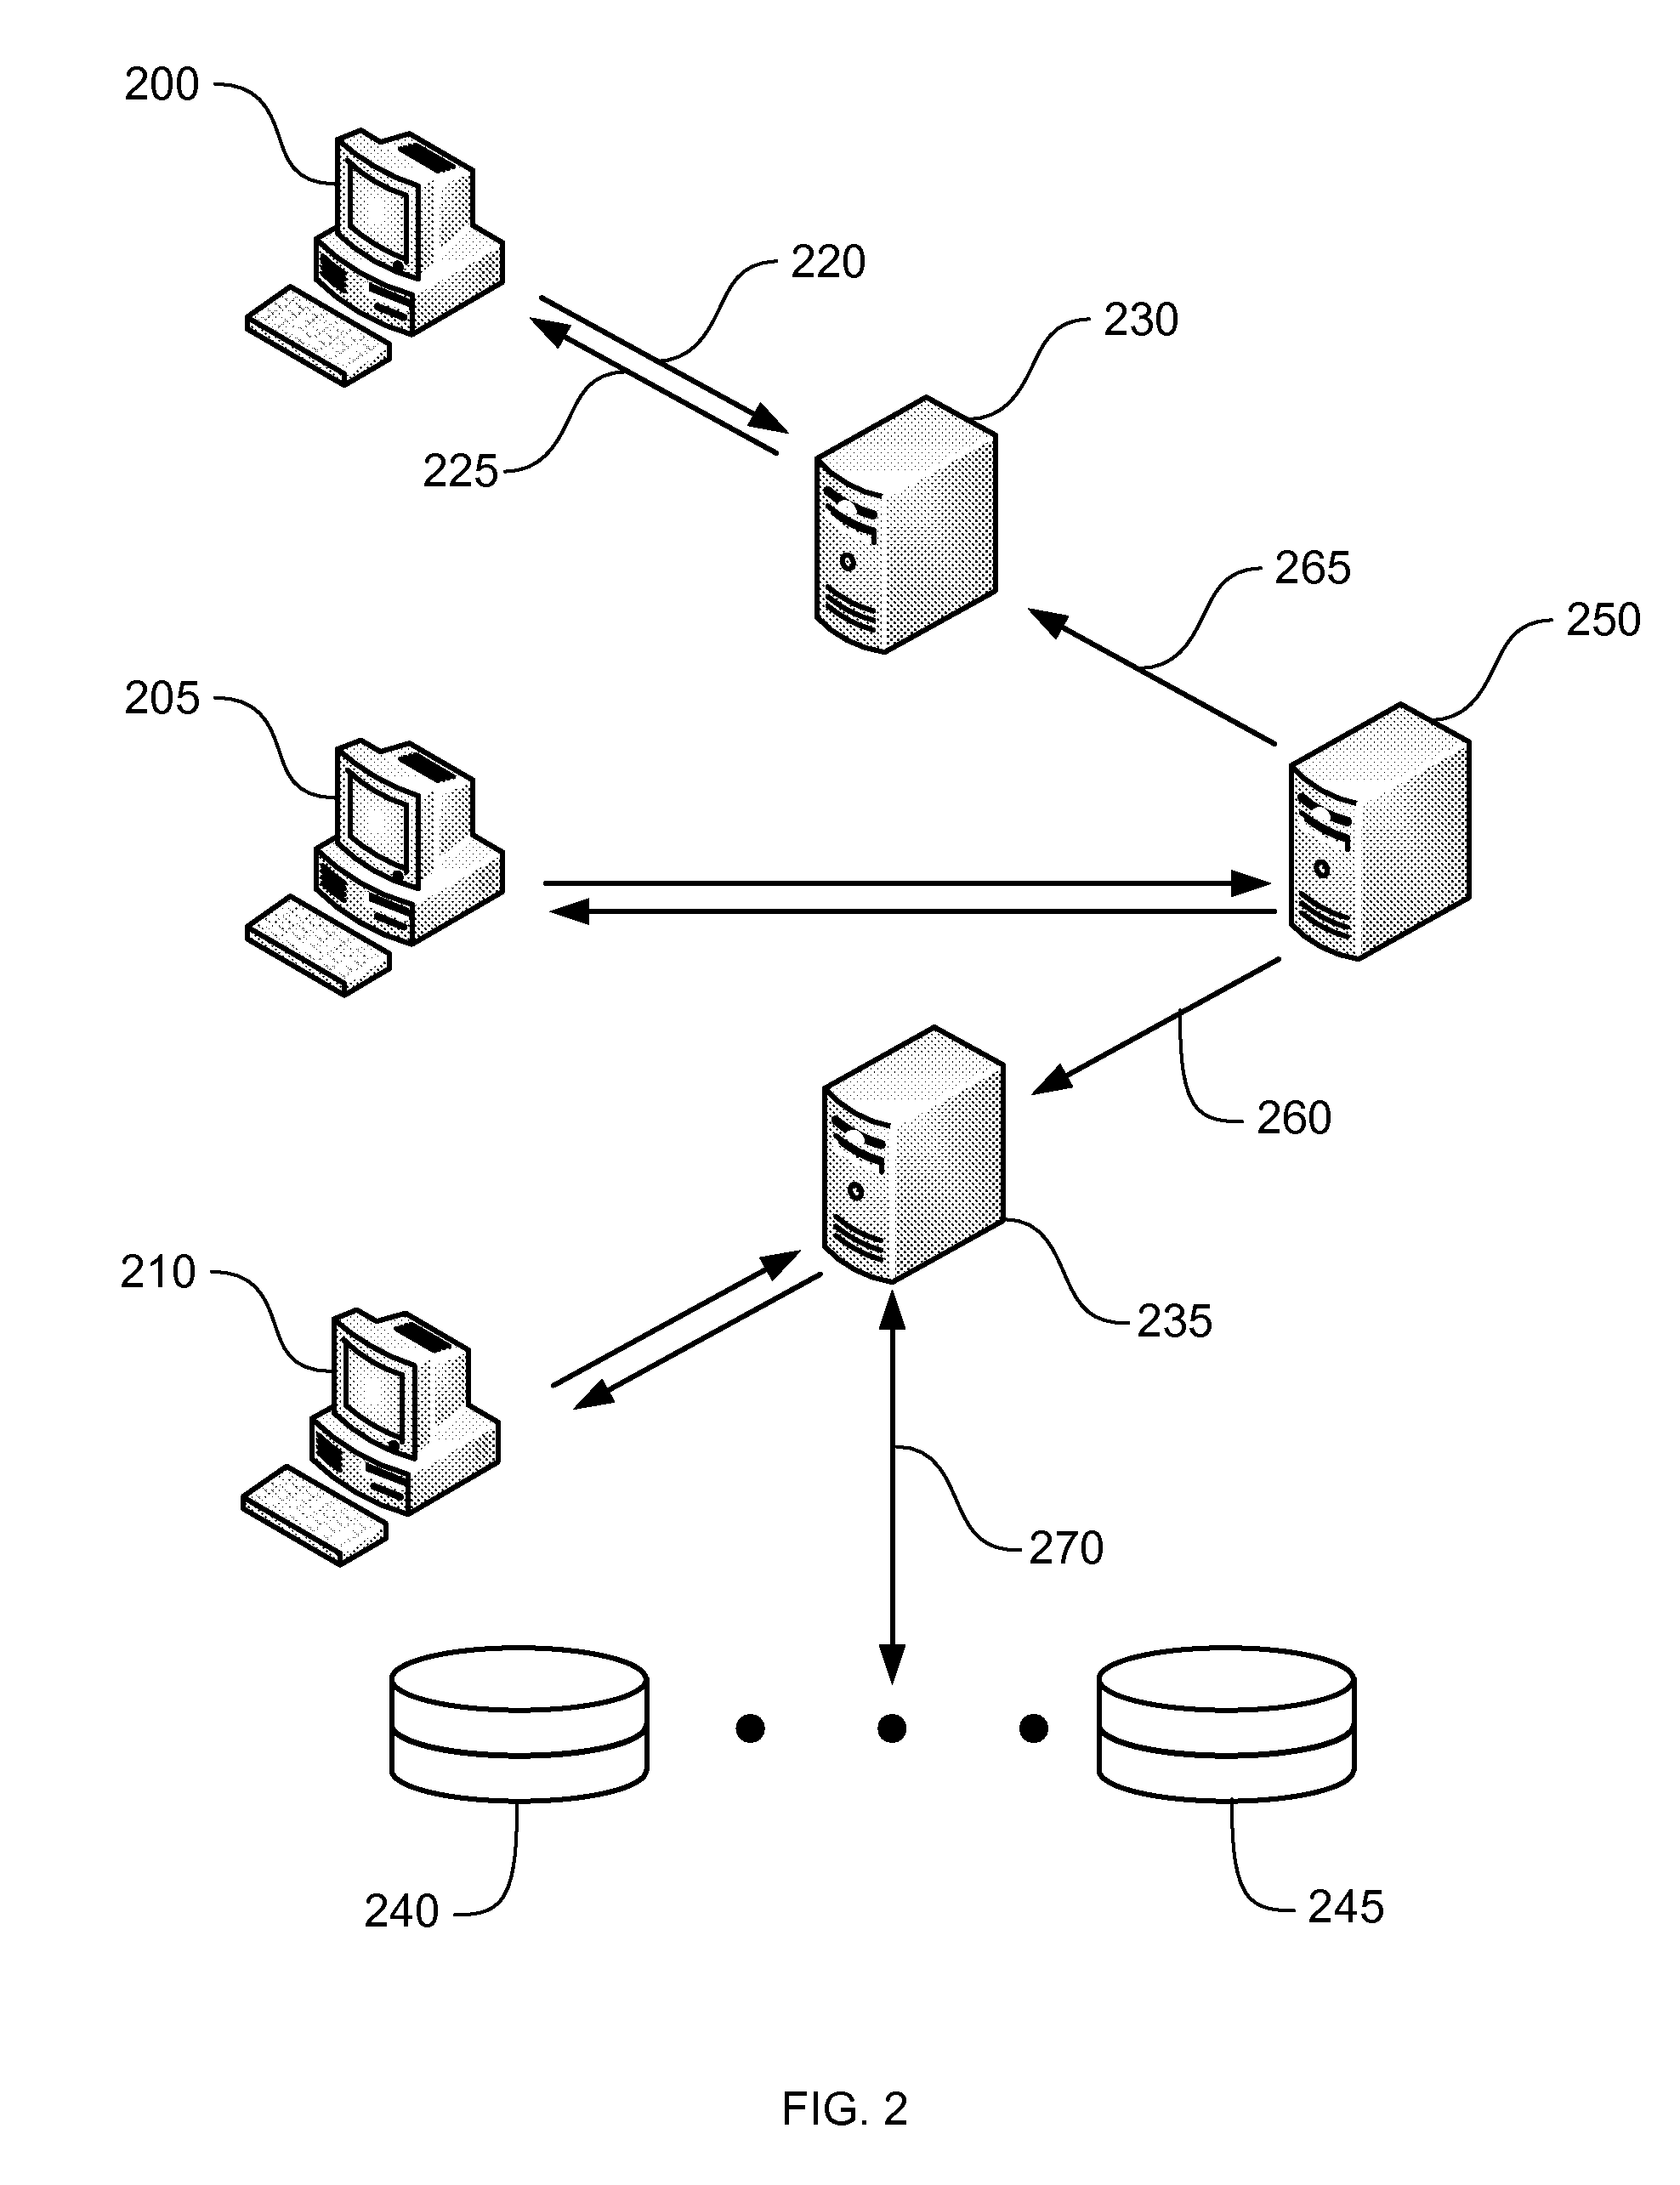 Device for generating selection structures, for making selections according to selection structures, and for creating selection descriptions